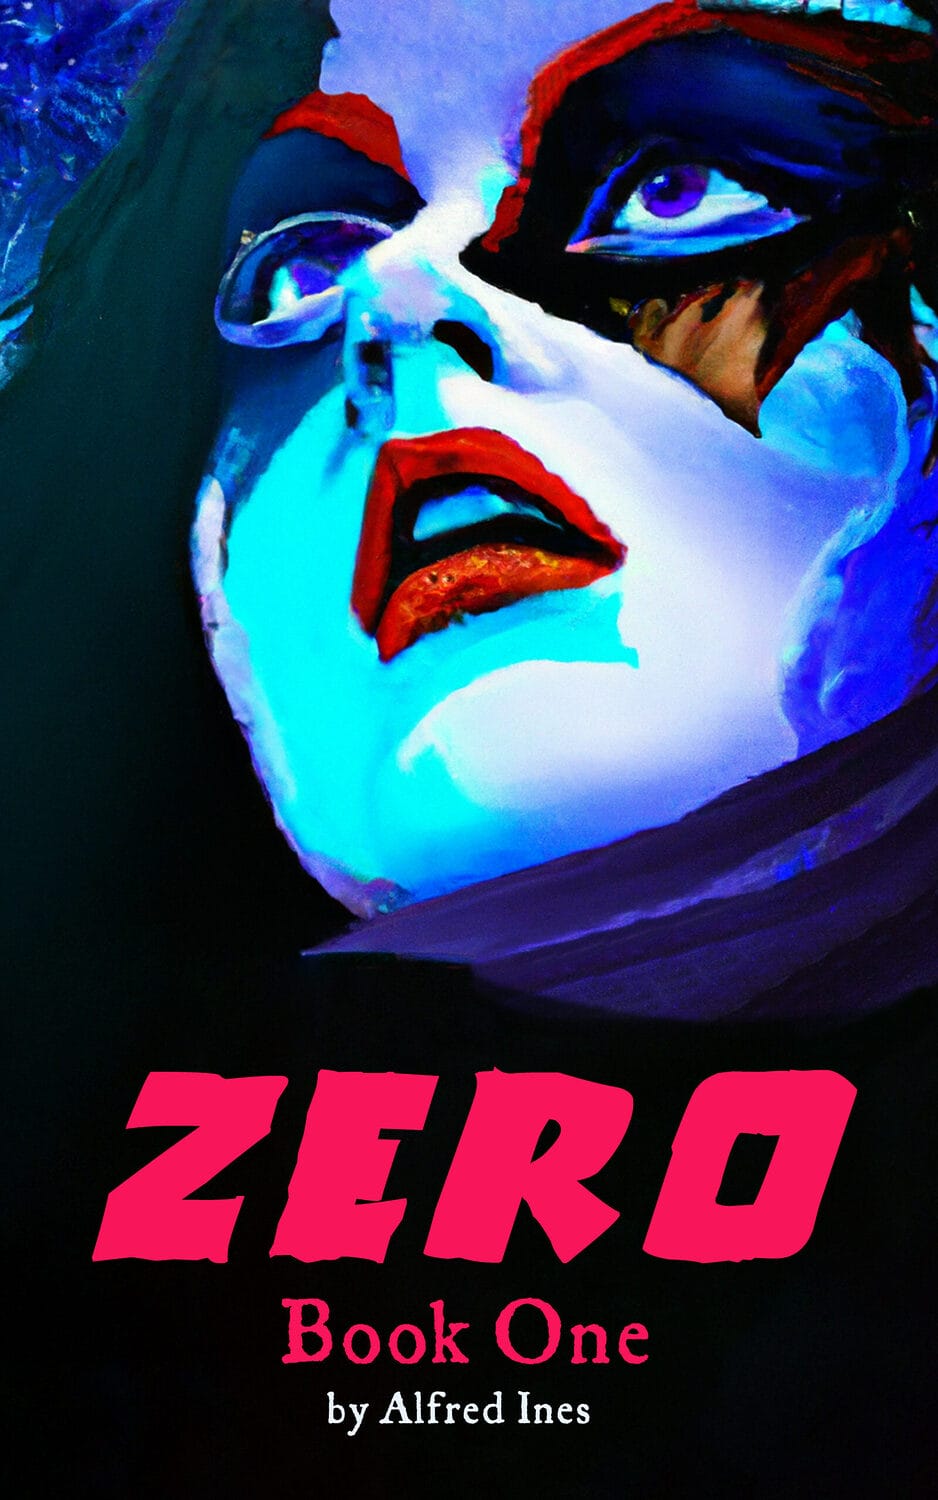 Zero, by Alfred Ines